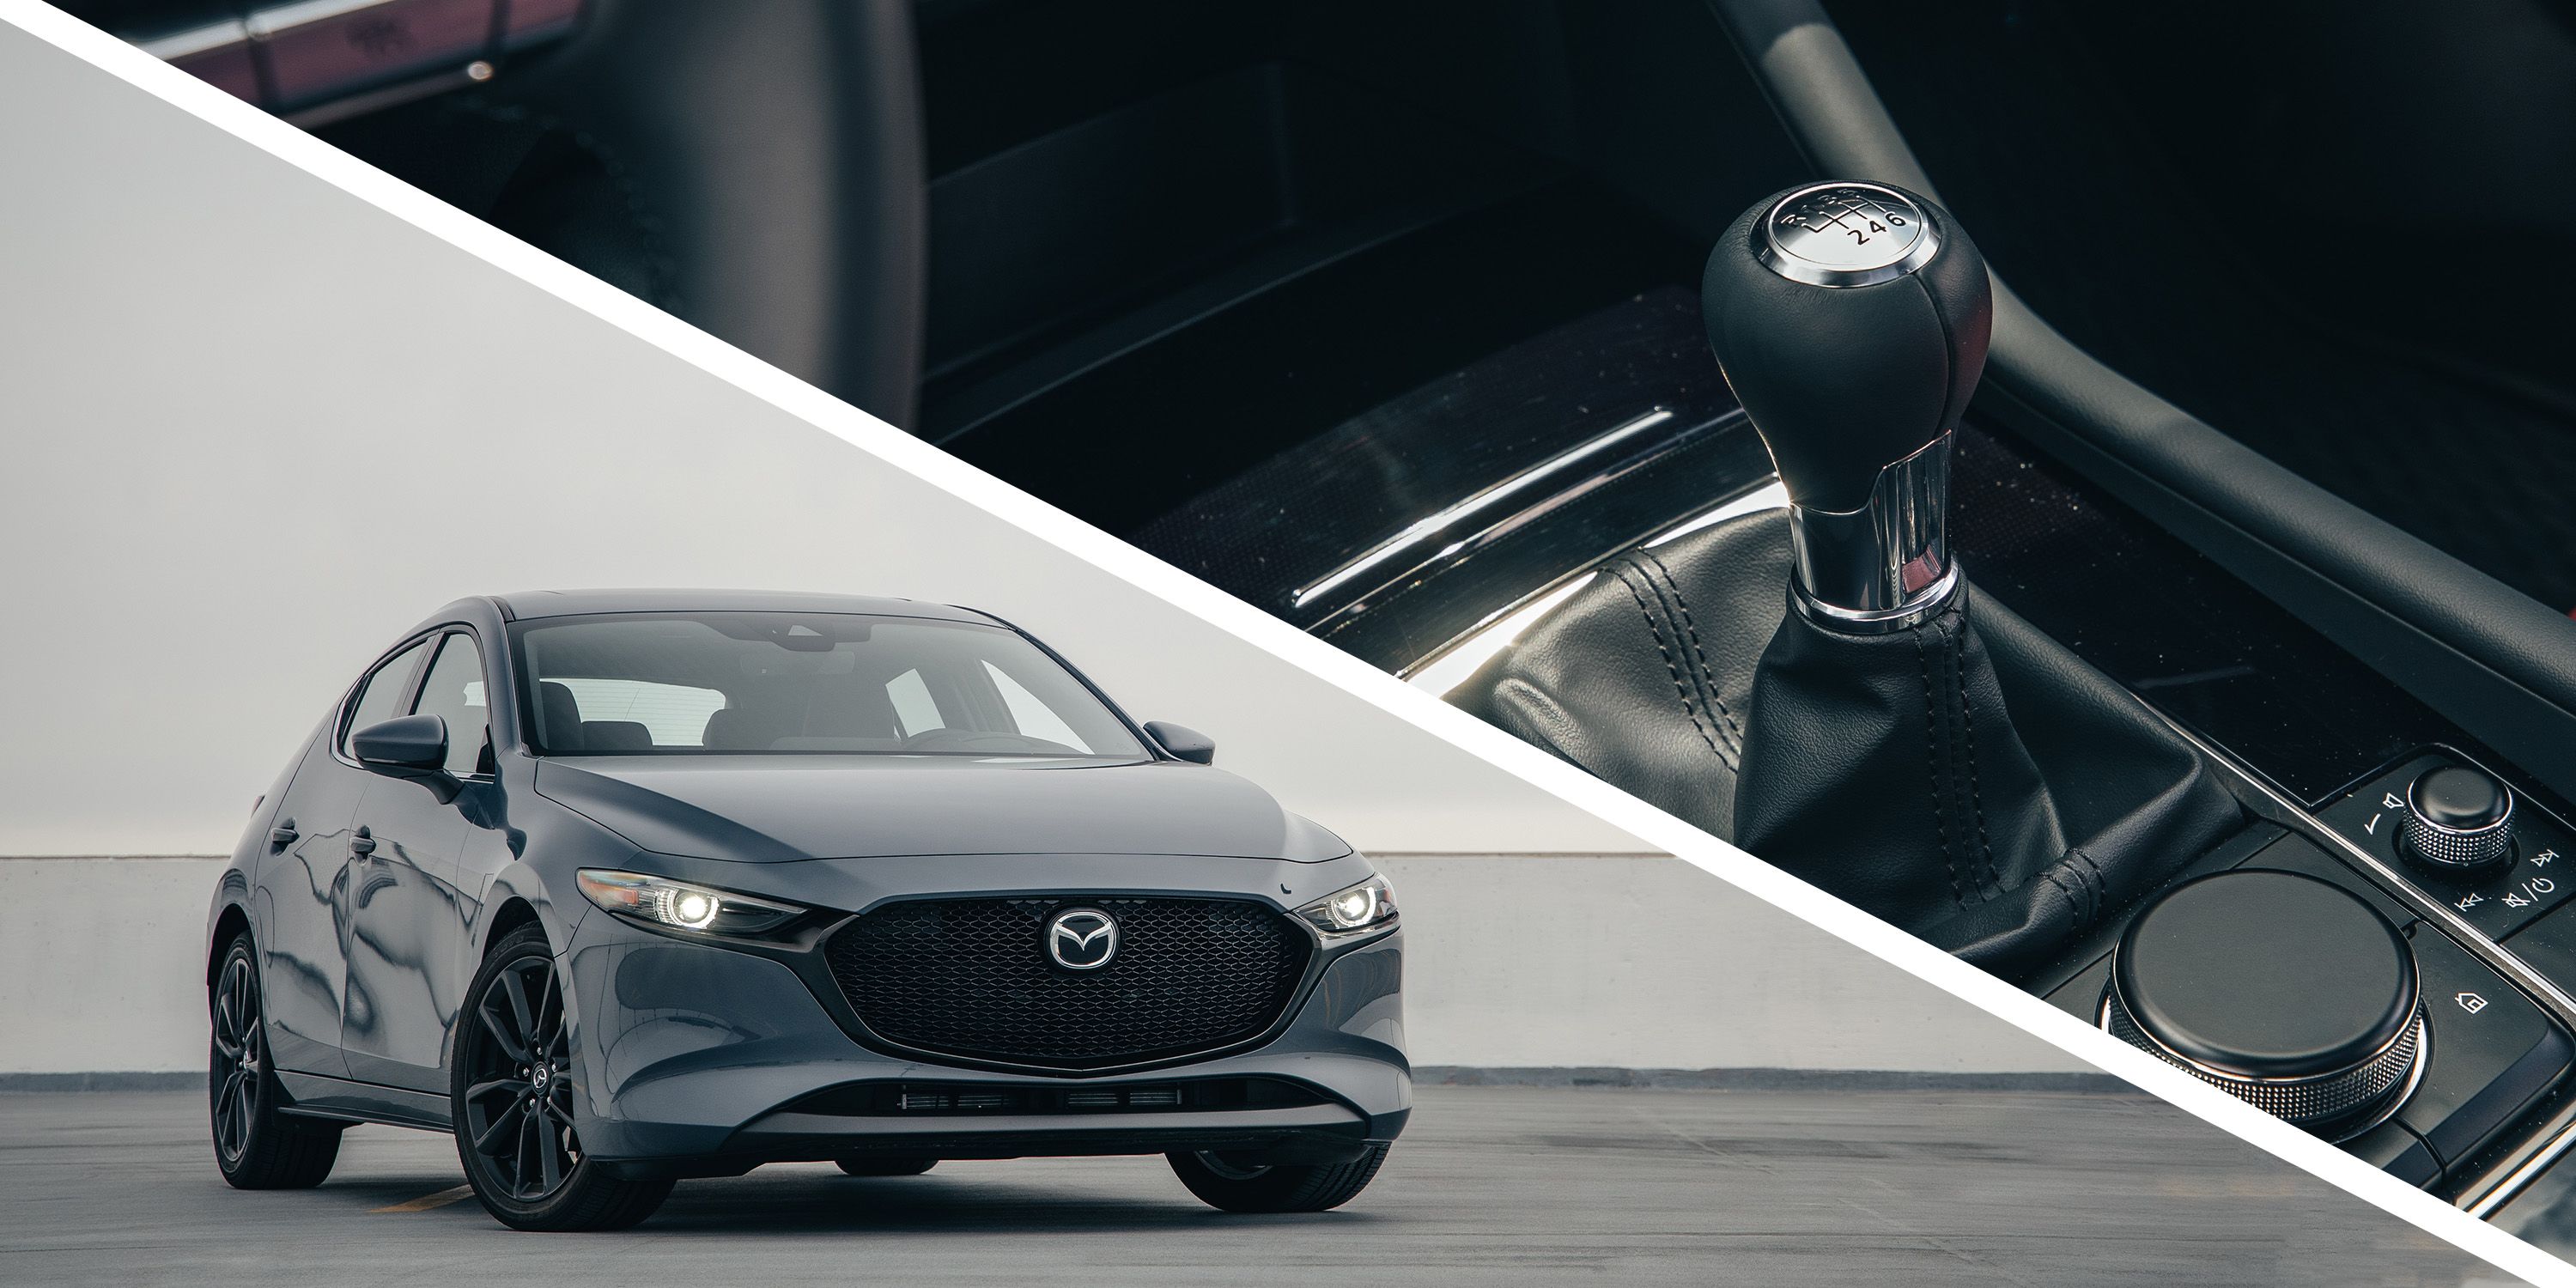 Comments on: Thank Goodness the 2019 Mazda 3 Still Offers a Manual